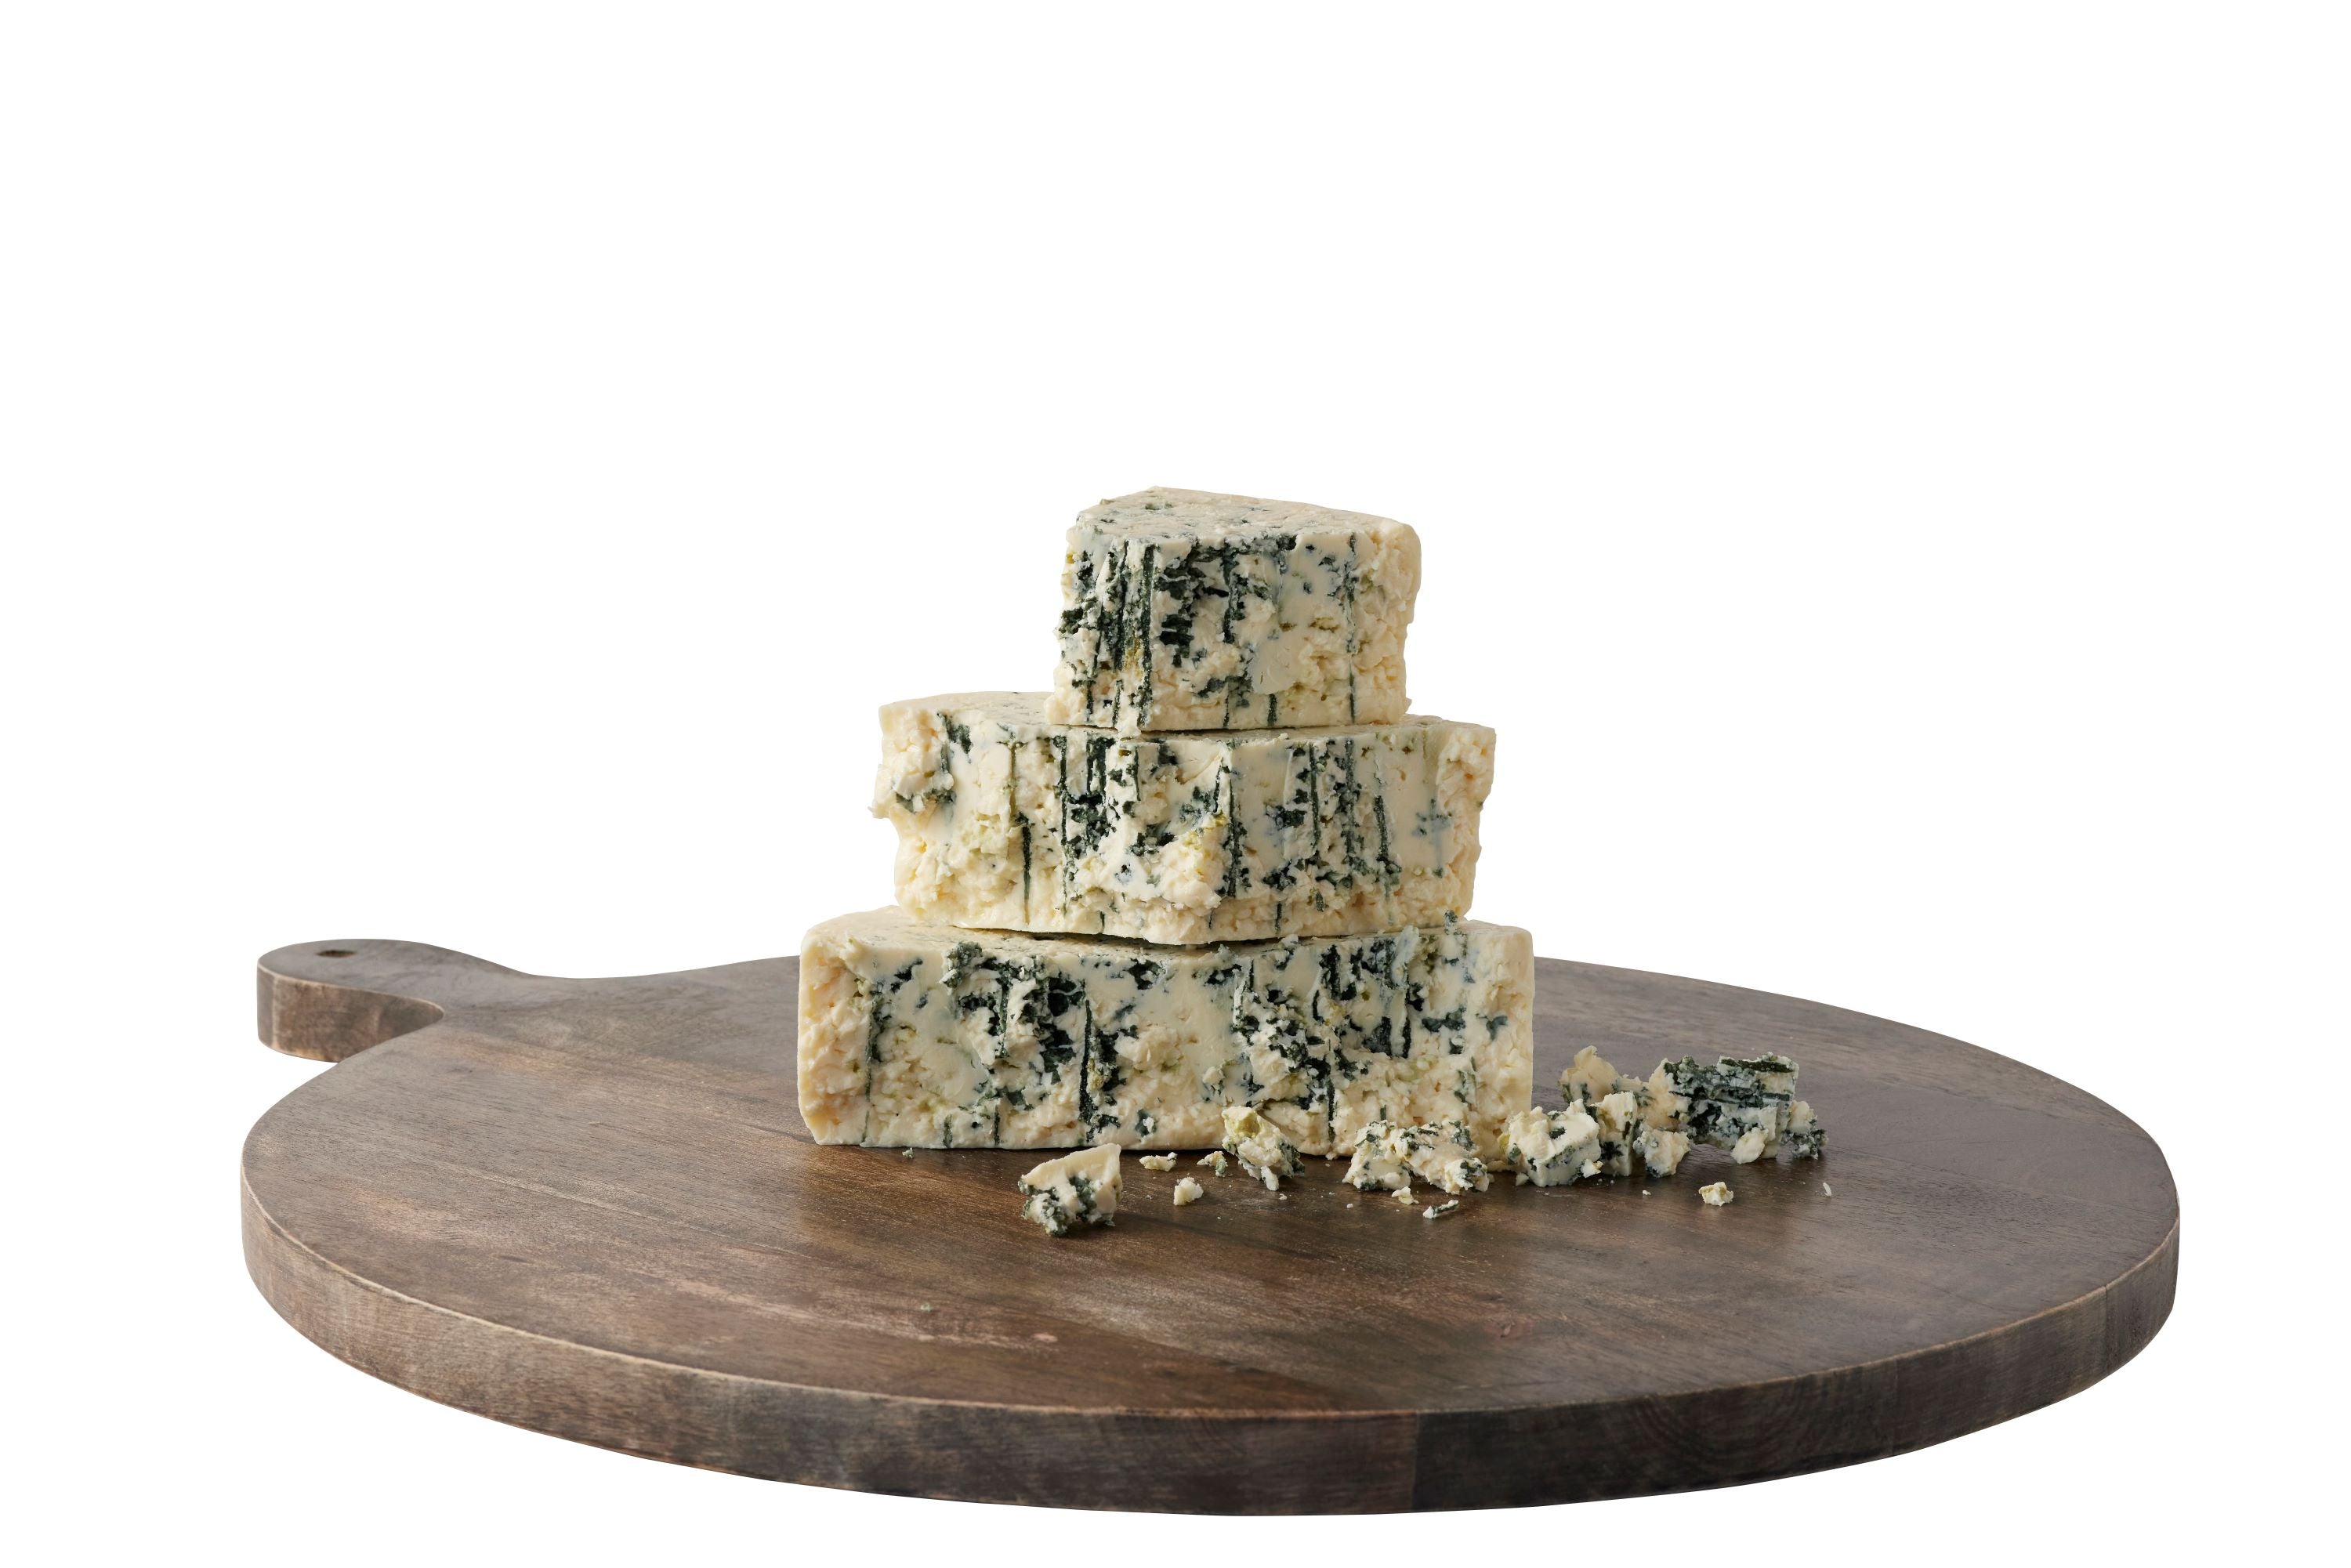 Original Blue cheese cut into pieces stacked on a brown cheeseboard 